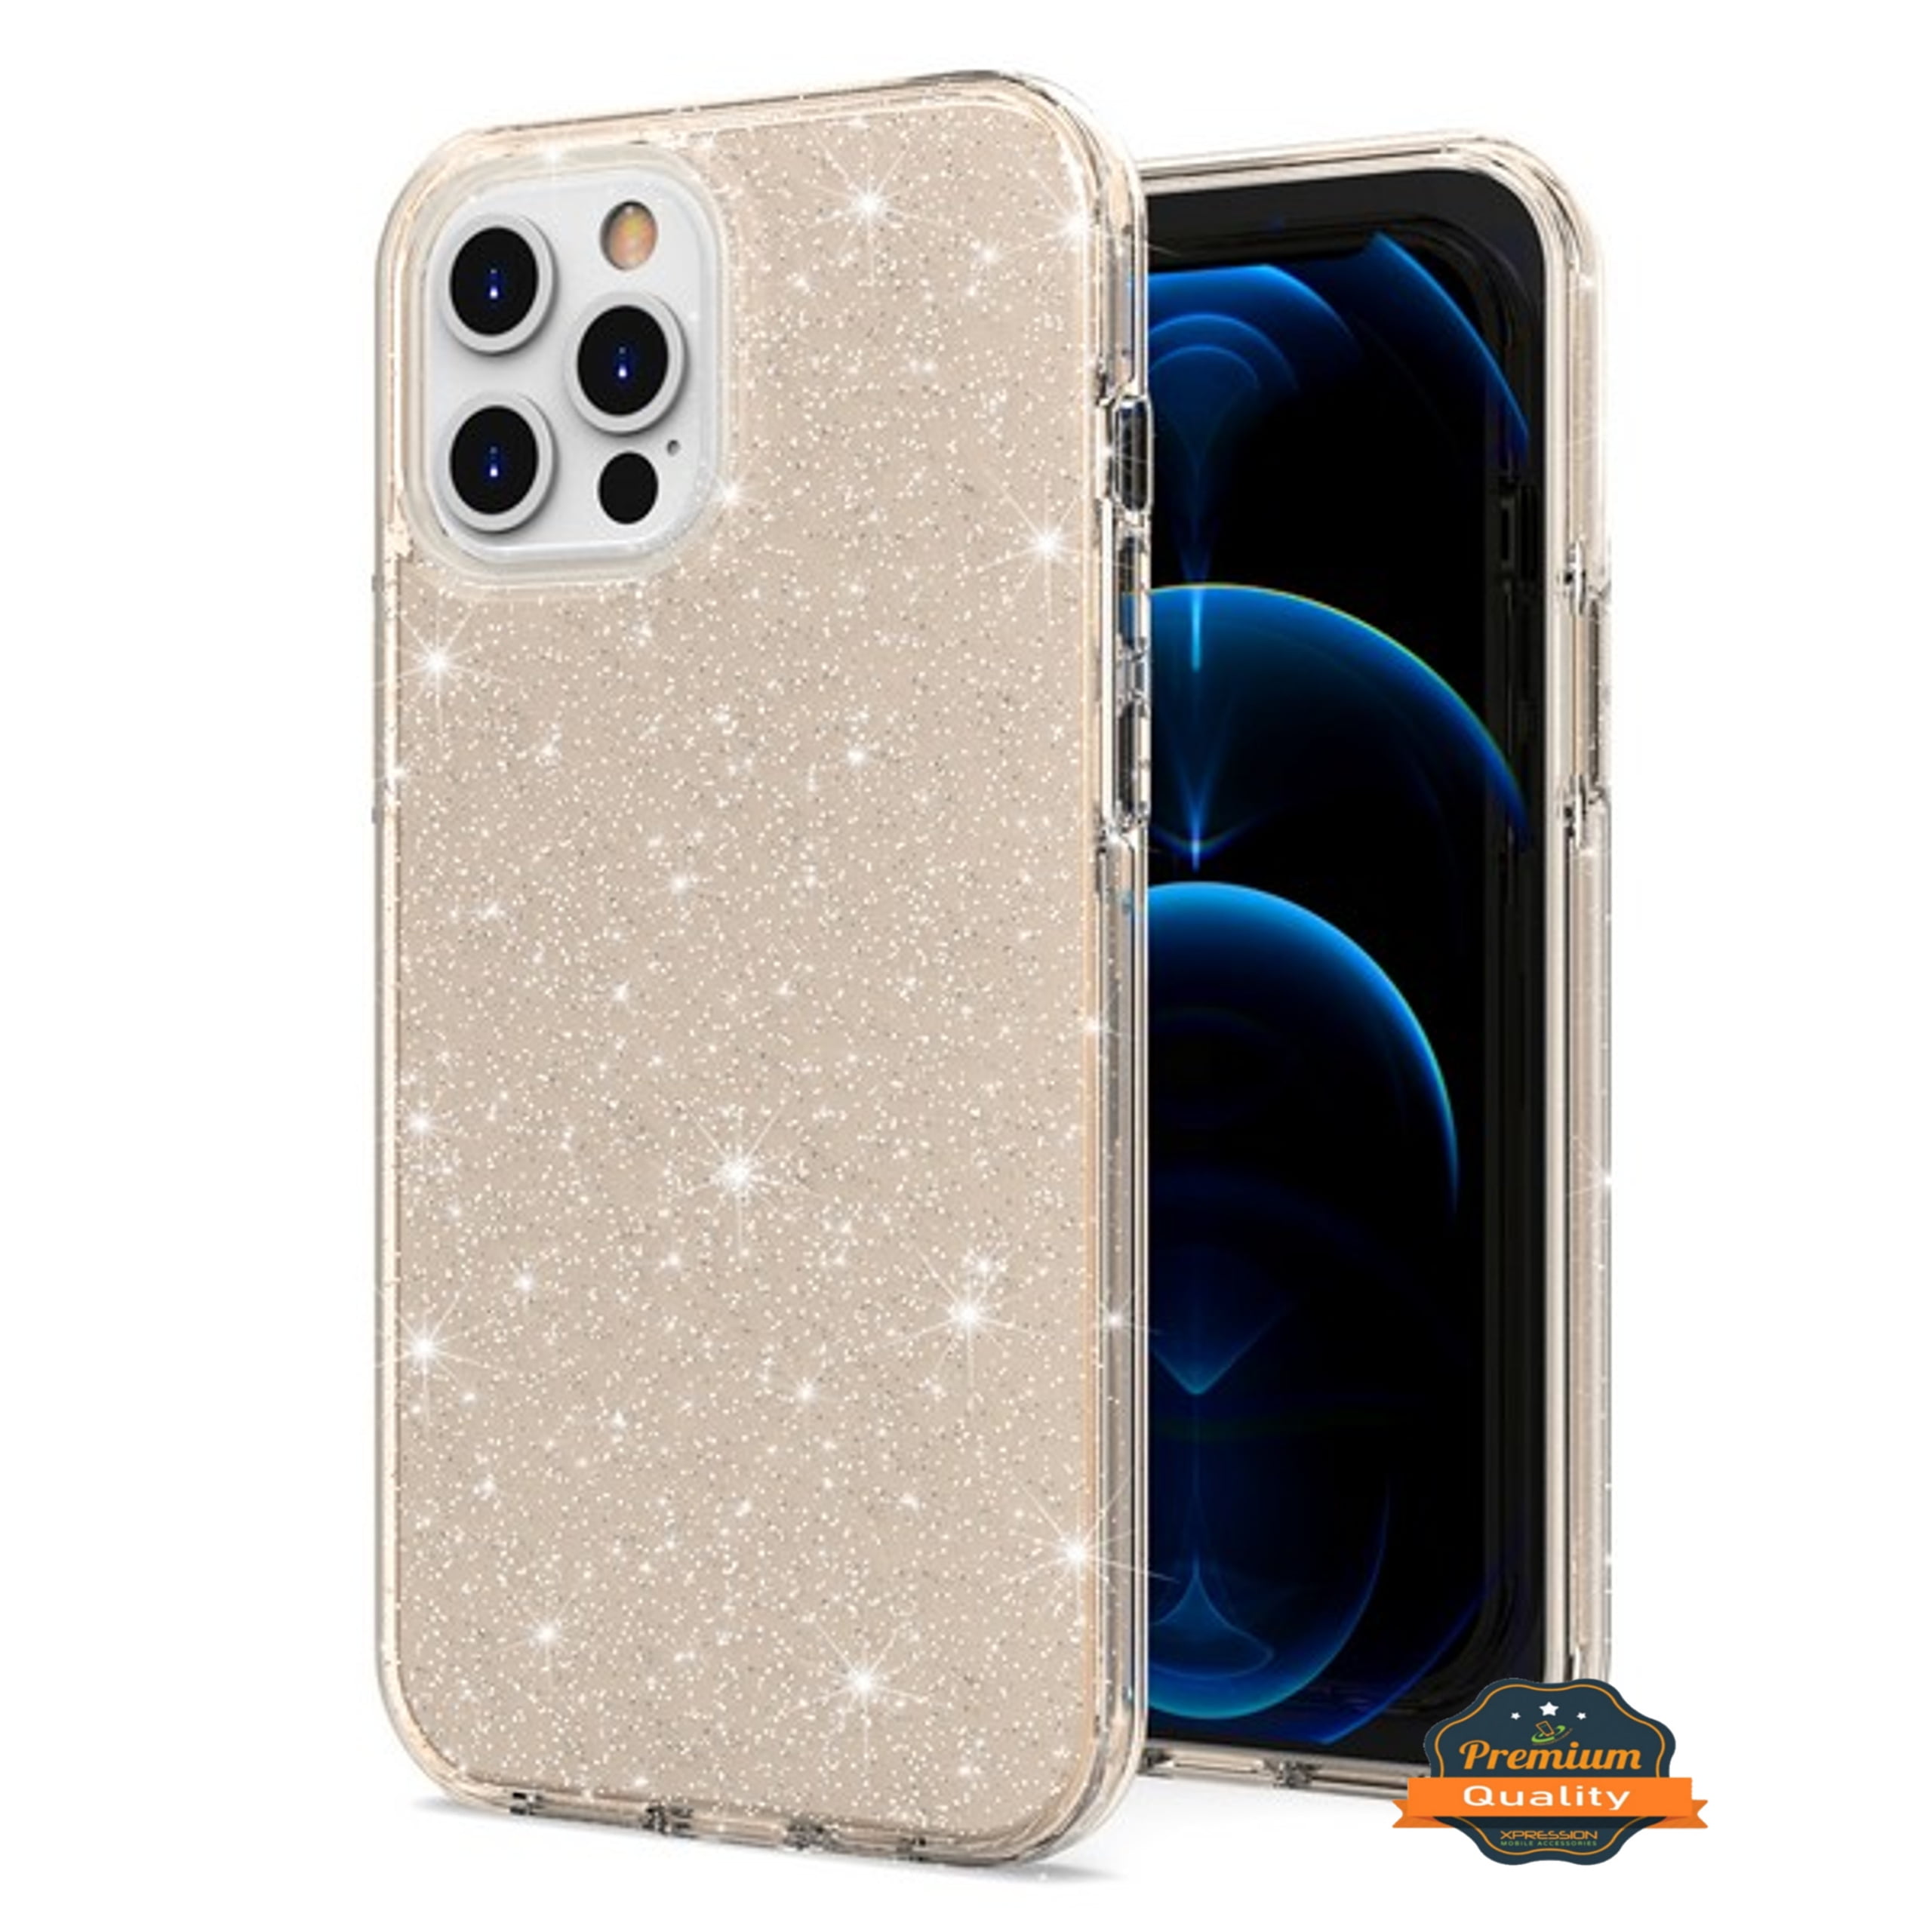 Buleens for Samsung Galaxy A14 5G Case Glitter Bling A14 5G Cases with  Metal Mirror Stand,Cute Women Girly Plated Cases for Samsung A14 5G,Luxury